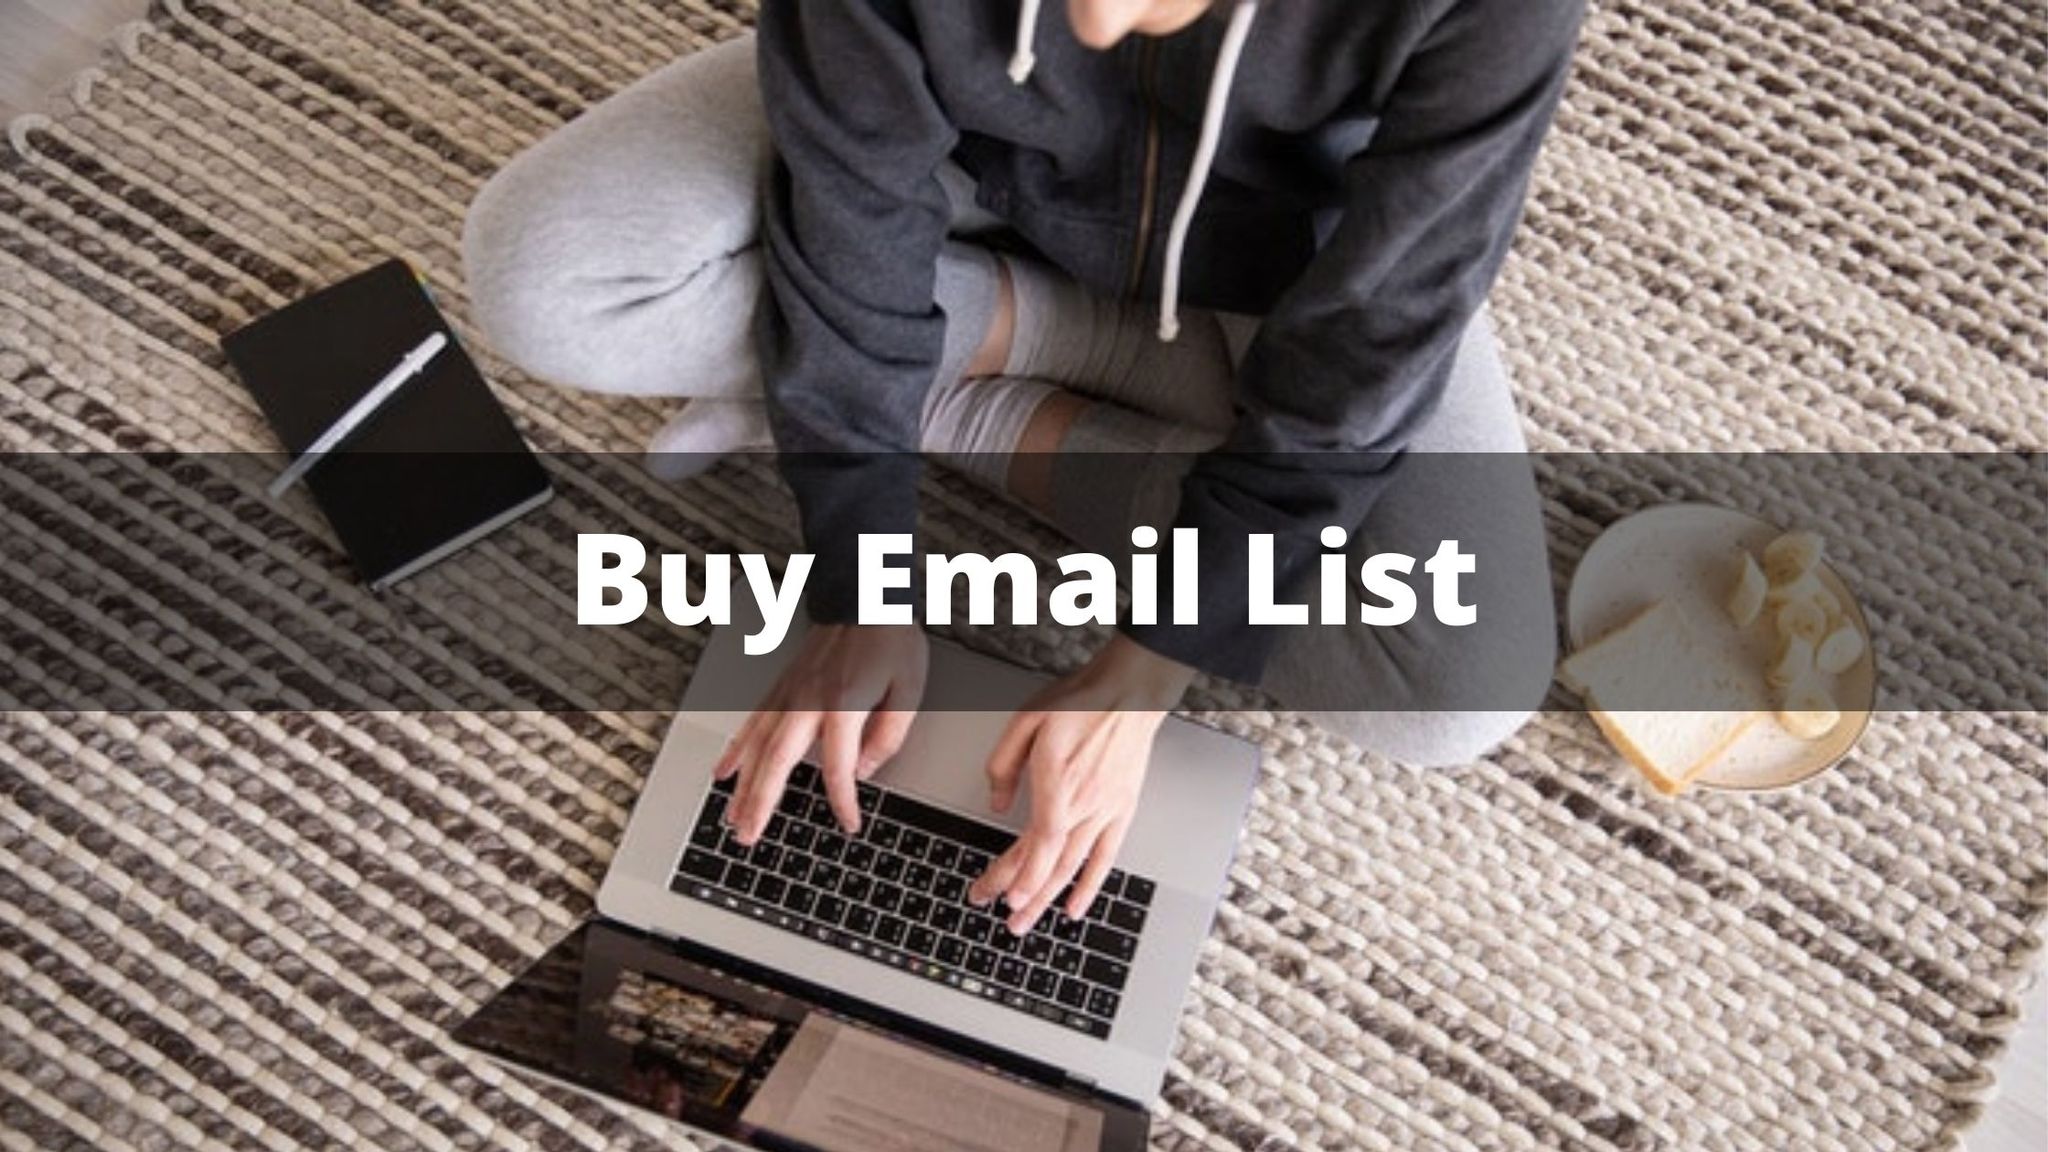 How to Know if Your Email List is Genuine?